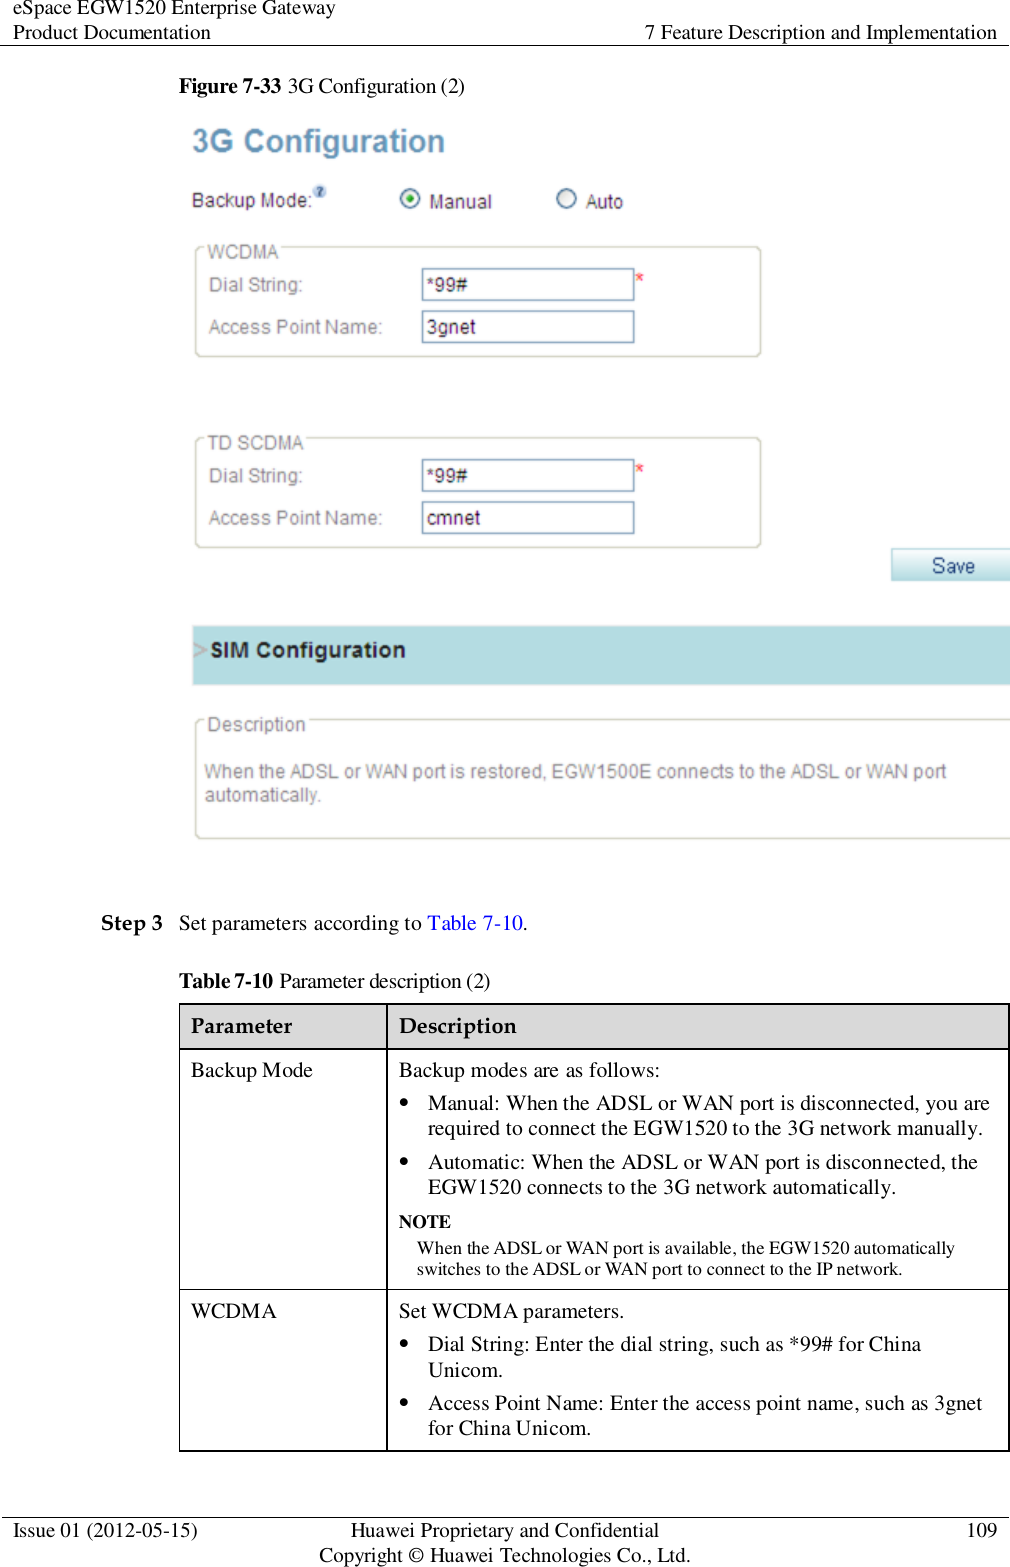 eSpace EGW1520 Enterprise Gateway Product Documentation 7 Feature Description and Implementation  Issue 01 (2012-05-15) Huawei Proprietary and Confidential                                     Copyright © Huawei Technologies Co., Ltd. 109  Figure 7-33 3G Configuration (2)   Step 3 Set parameters according to Table 7-10. Table 7-10 Parameter description (2) Parameter Description Backup Mode Backup modes are as follows:  Manual: When the ADSL or WAN port is disconnected, you are required to connect the EGW1520 to the 3G network manually.    Automatic: When the ADSL or WAN port is disconnected, the EGW1520 connects to the 3G network automatically. NOTE When the ADSL or WAN port is available, the EGW1520 automatically switches to the ADSL or WAN port to connect to the IP network. WCDMA Set WCDMA parameters.  Dial String: Enter the dial string, such as *99# for China Unicom.  Access Point Name: Enter the access point name, such as 3gnet for China Unicom. 